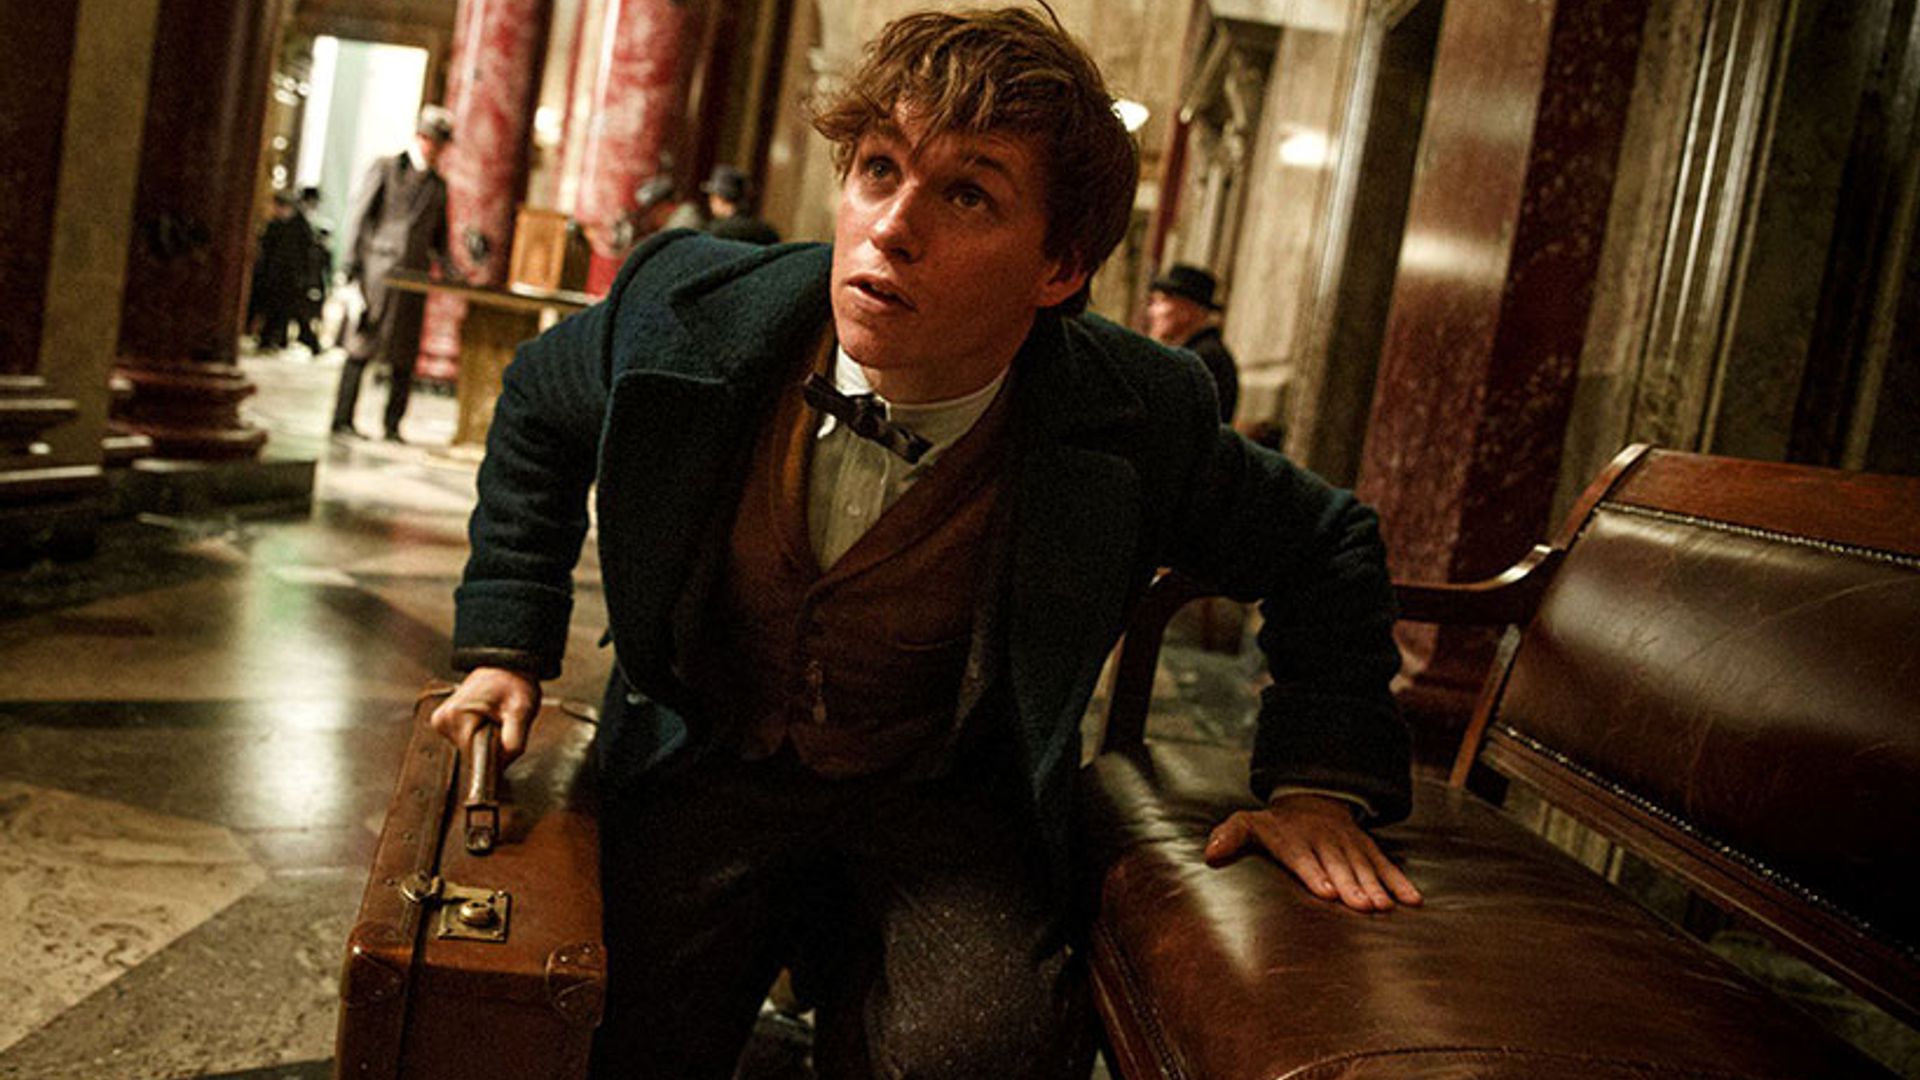 JK Rowling drops Fantastic Beasts and Where to Find Them sequel hint